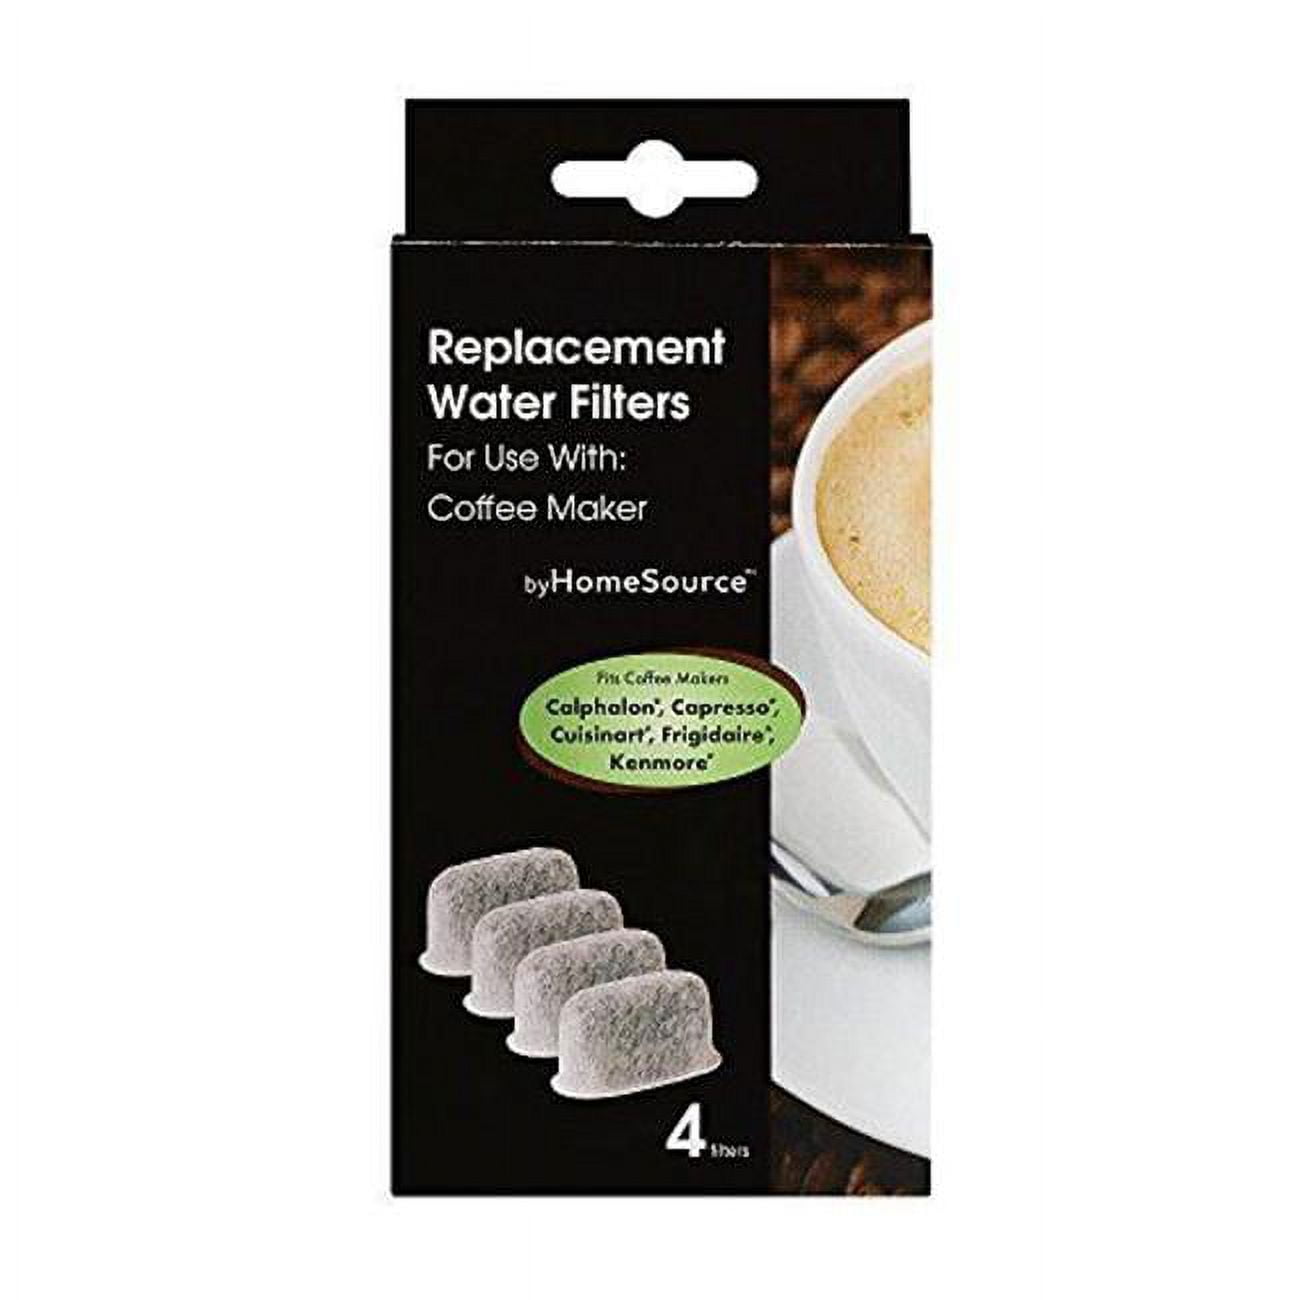 GLACIER FRESH Replacement for P4INKFILTR Ice Maker Water Filter, 4